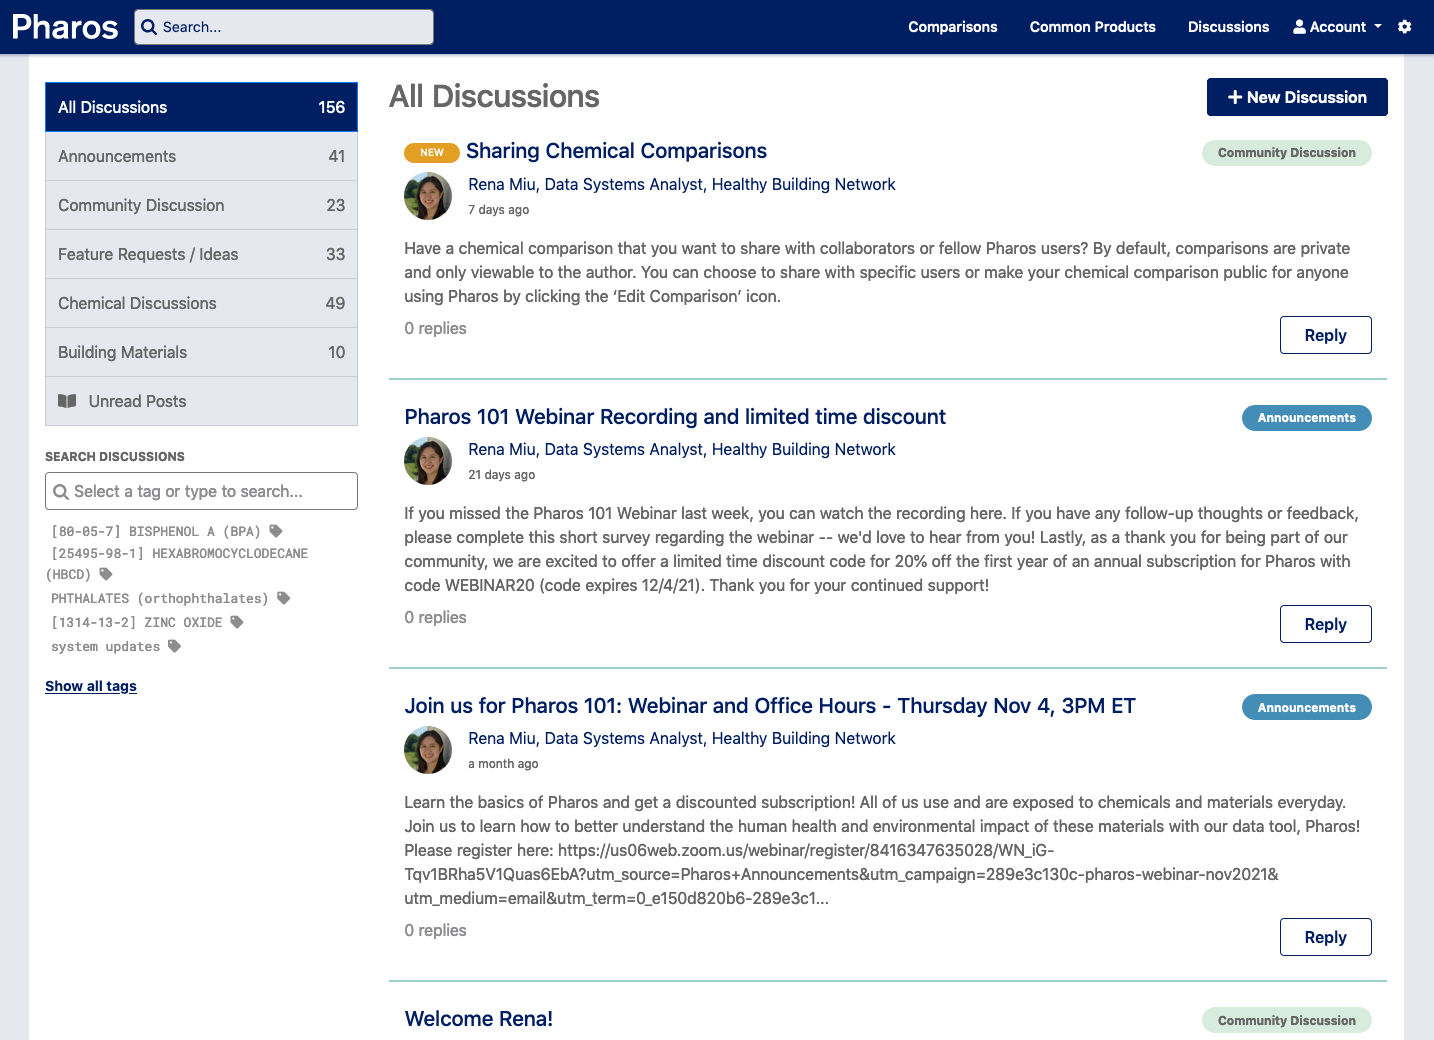 Preview screenshot of the Pharos discussion board, with snippets of the most recent discussions and buttons to post or reply.